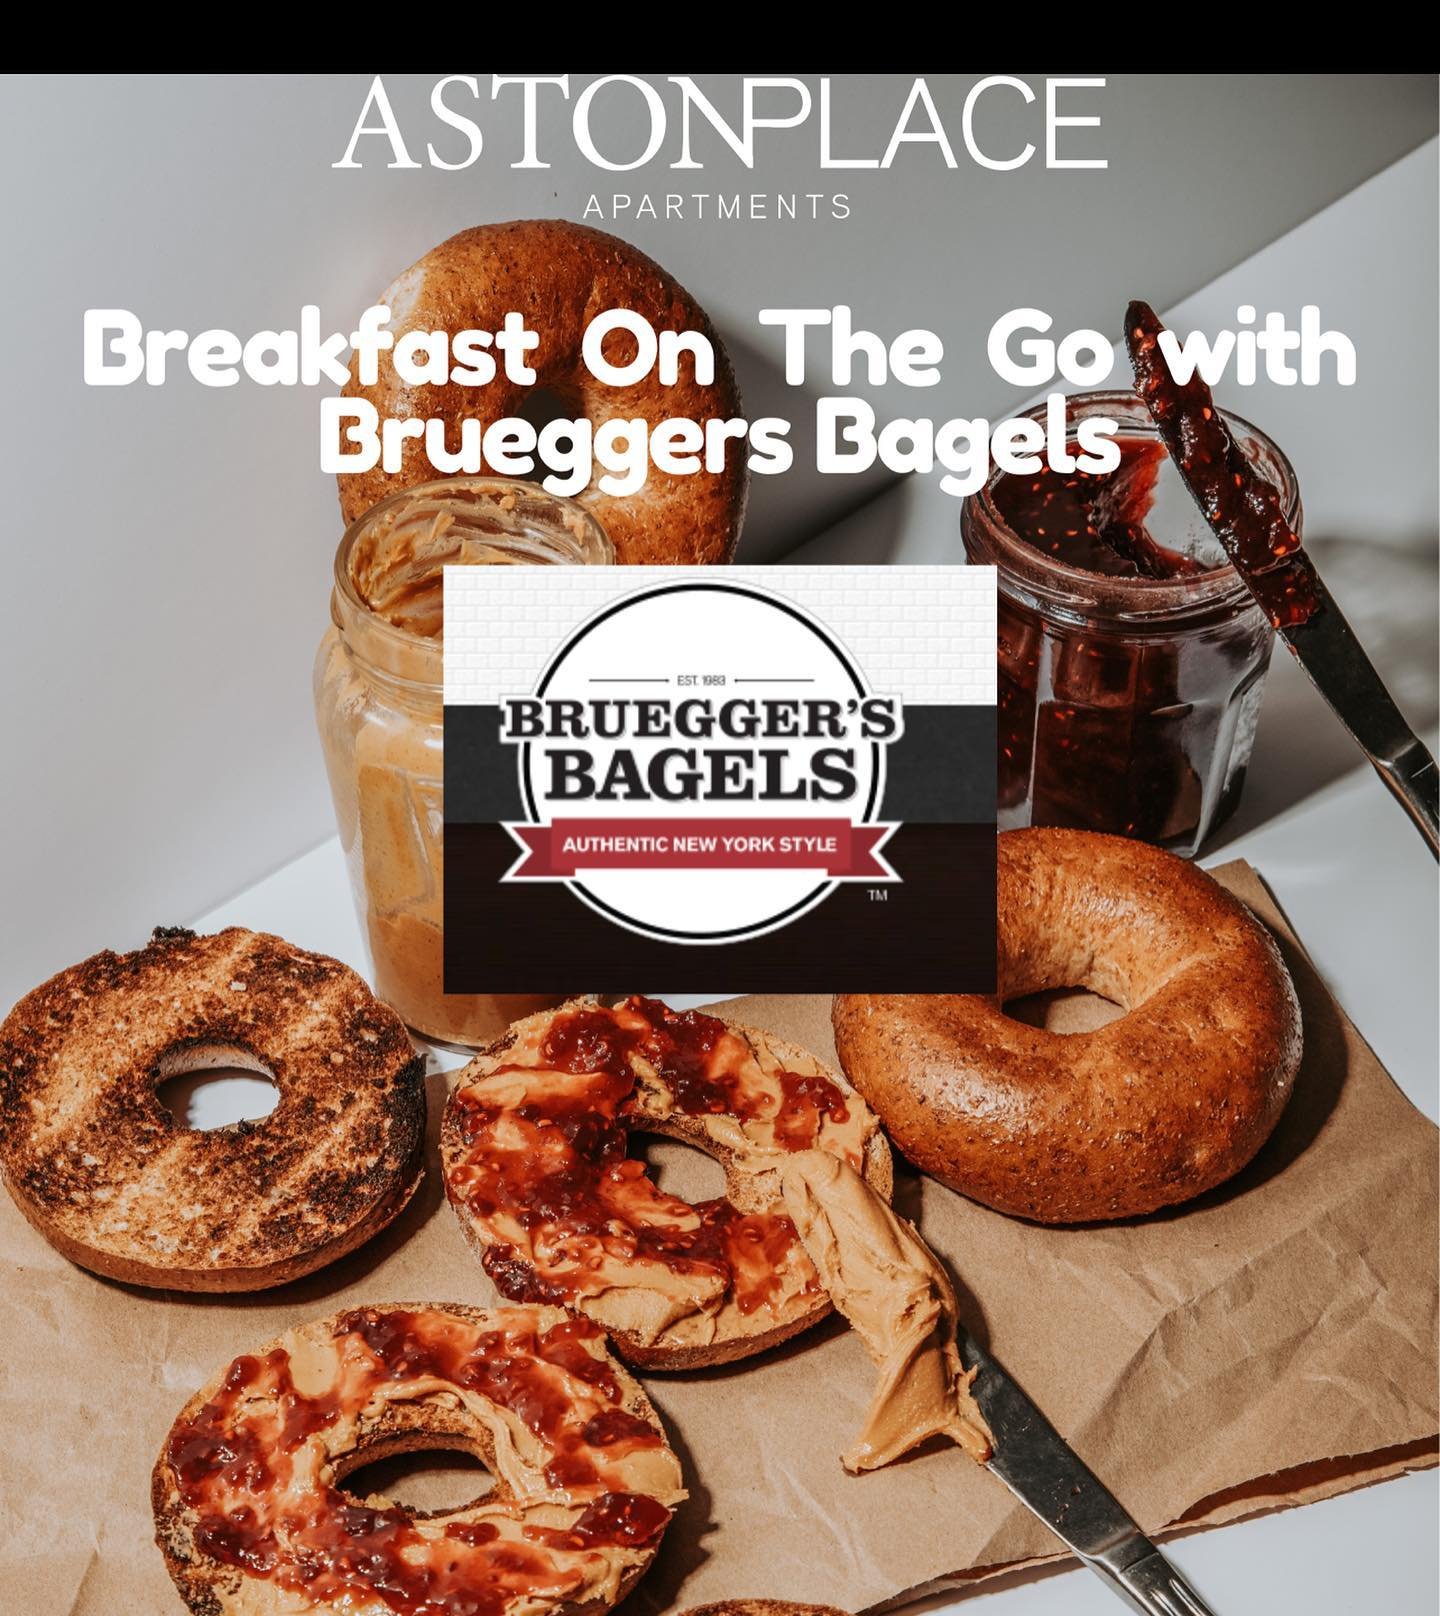 Breakfast on the Go the morning with Bruegger&rsquo;s Bagels @brueggersosu 🥯🥯🥯#bagels#shortnorthcolumbus #columbusapartments